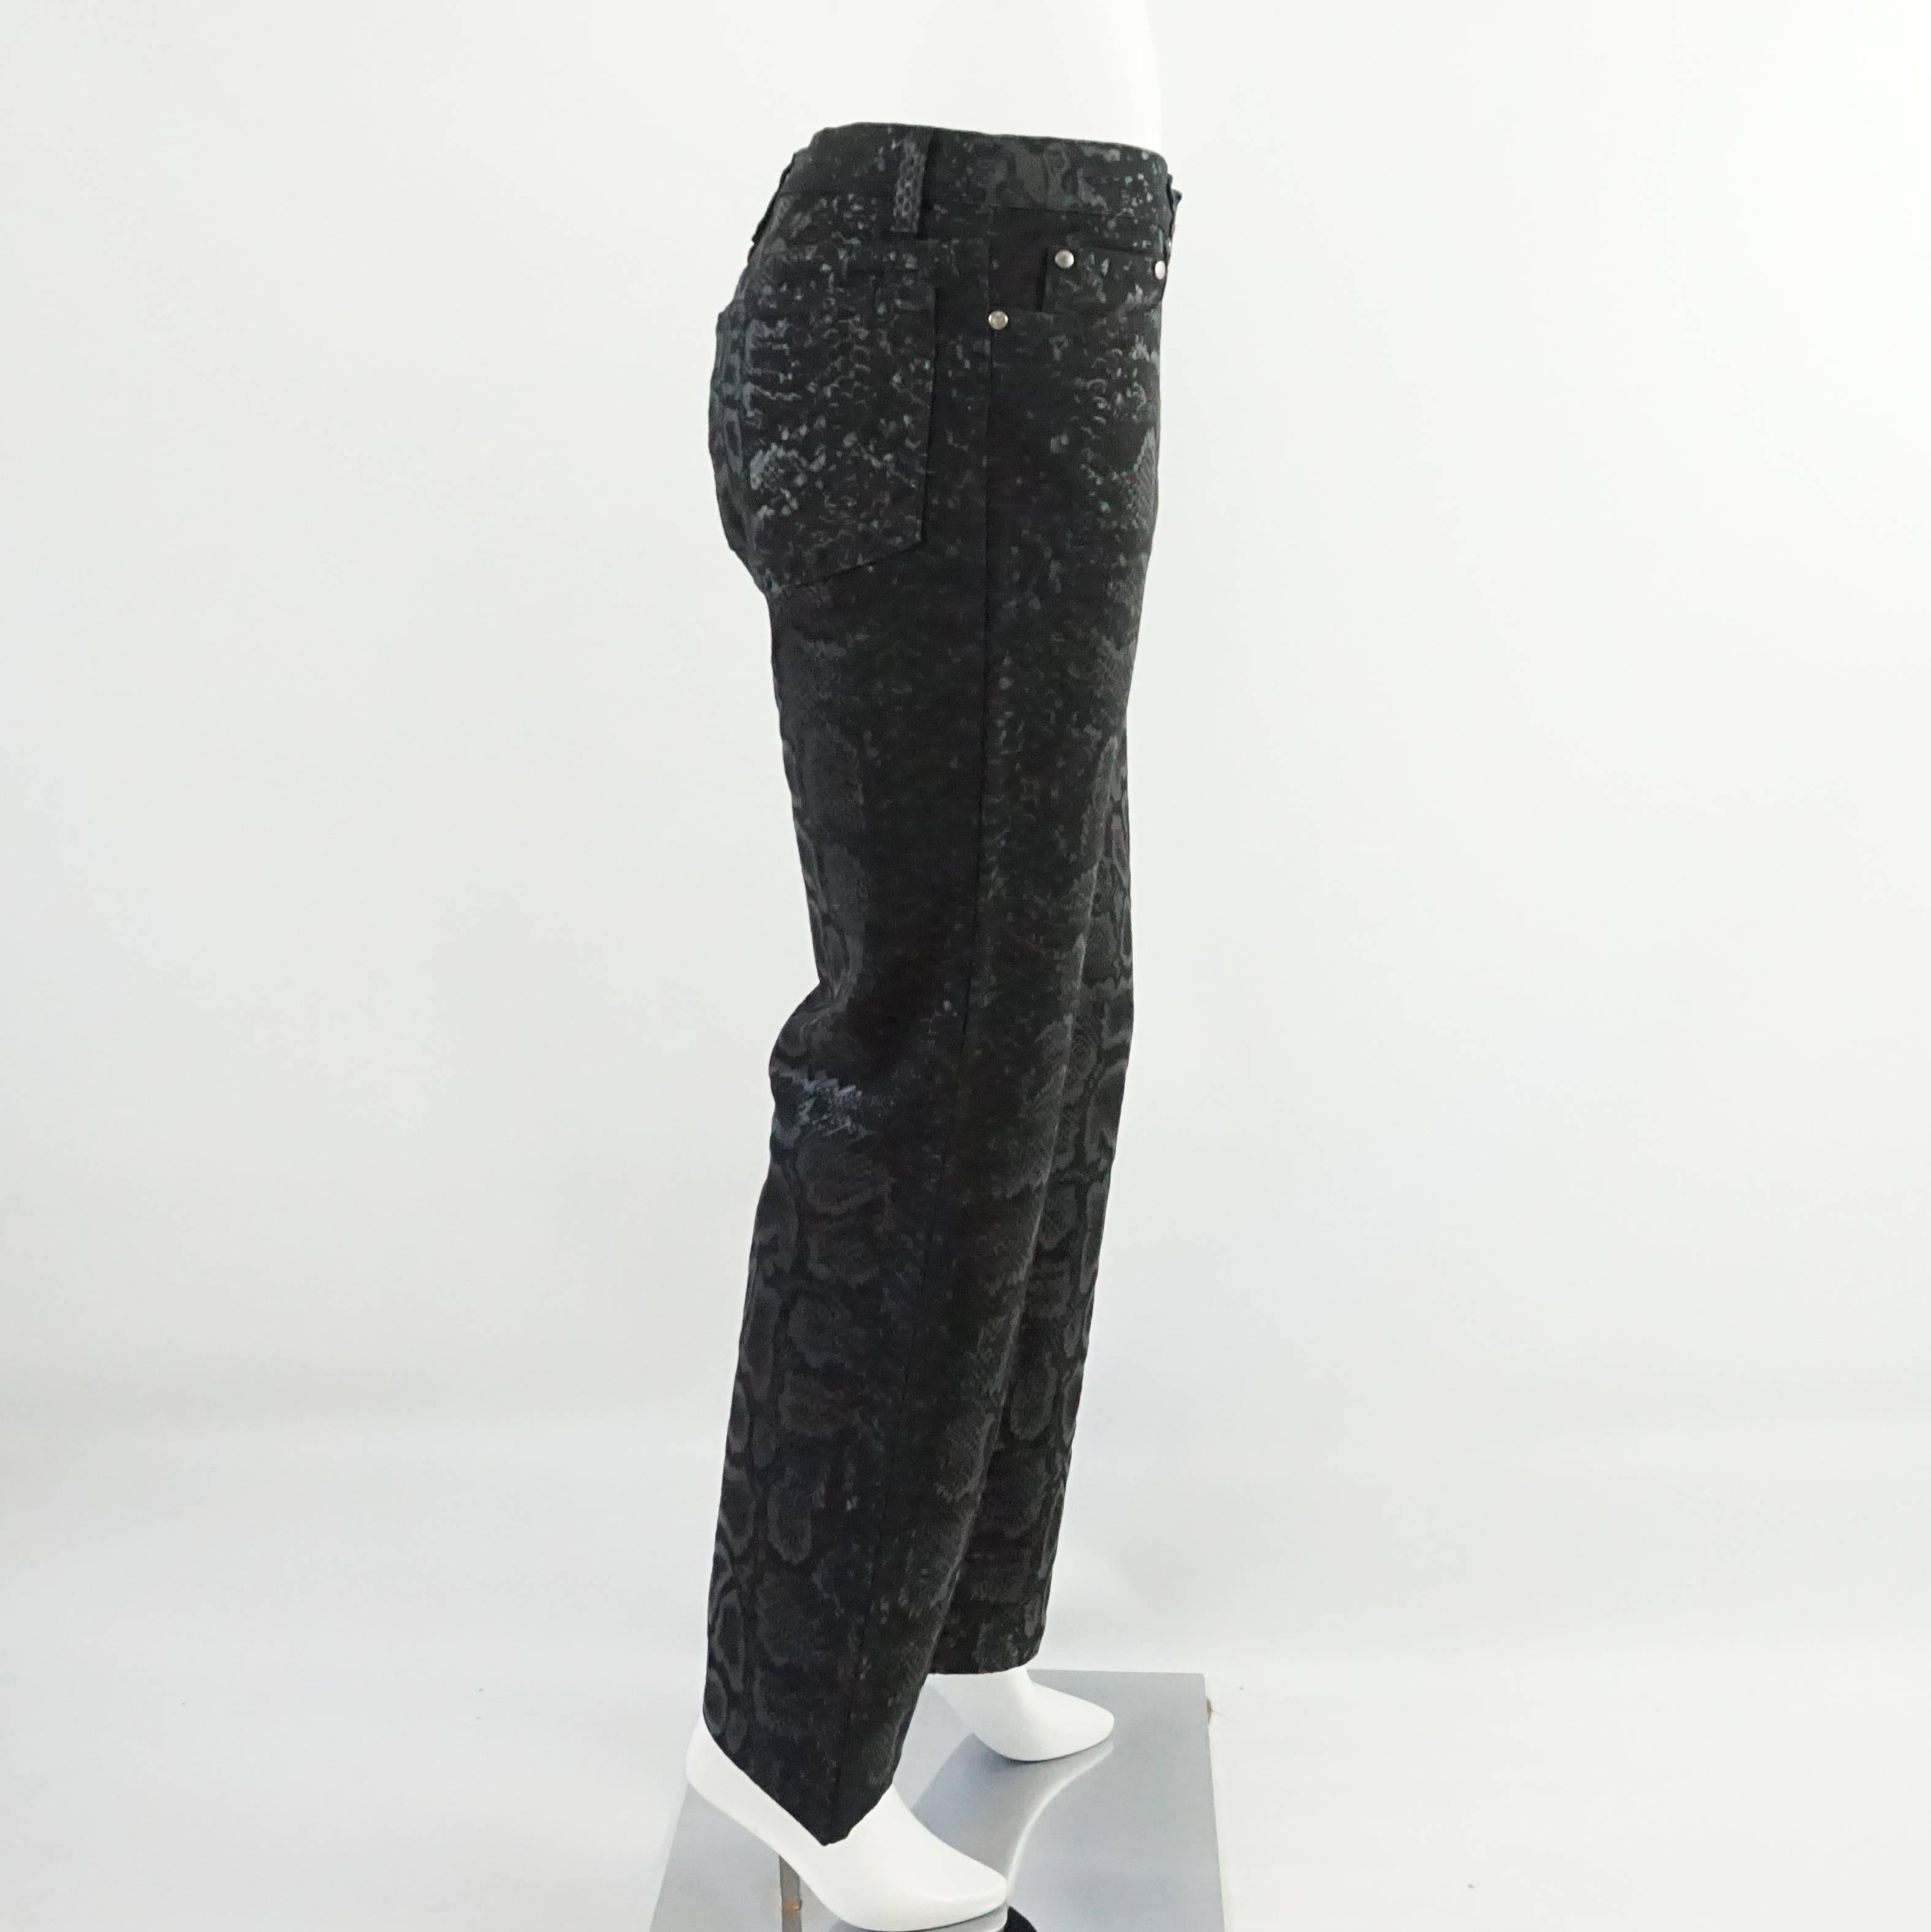 These interesting Roberto Cavalli jeans are black and have a metallic snake print. They are in excellent condition.

Measurements
Waist: 32"
Hips: 36"
Length: 40.25"
Inseam: 31"
Bottom of Pant Leg: 9"